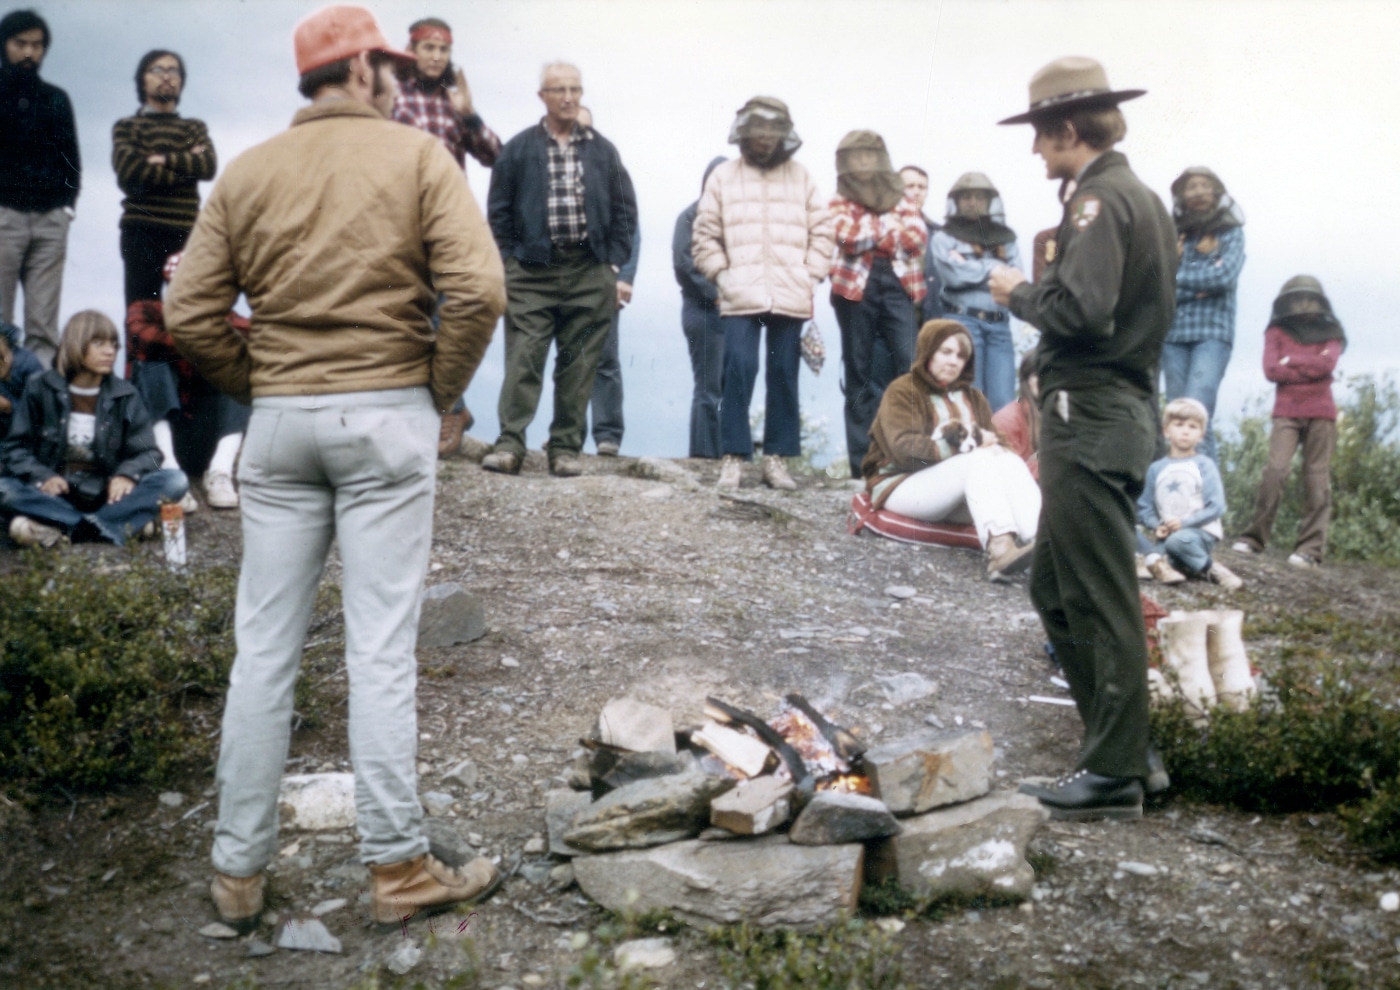 In this photograph, a National Park Ranger provides a campfire safety demonstration to new campers.